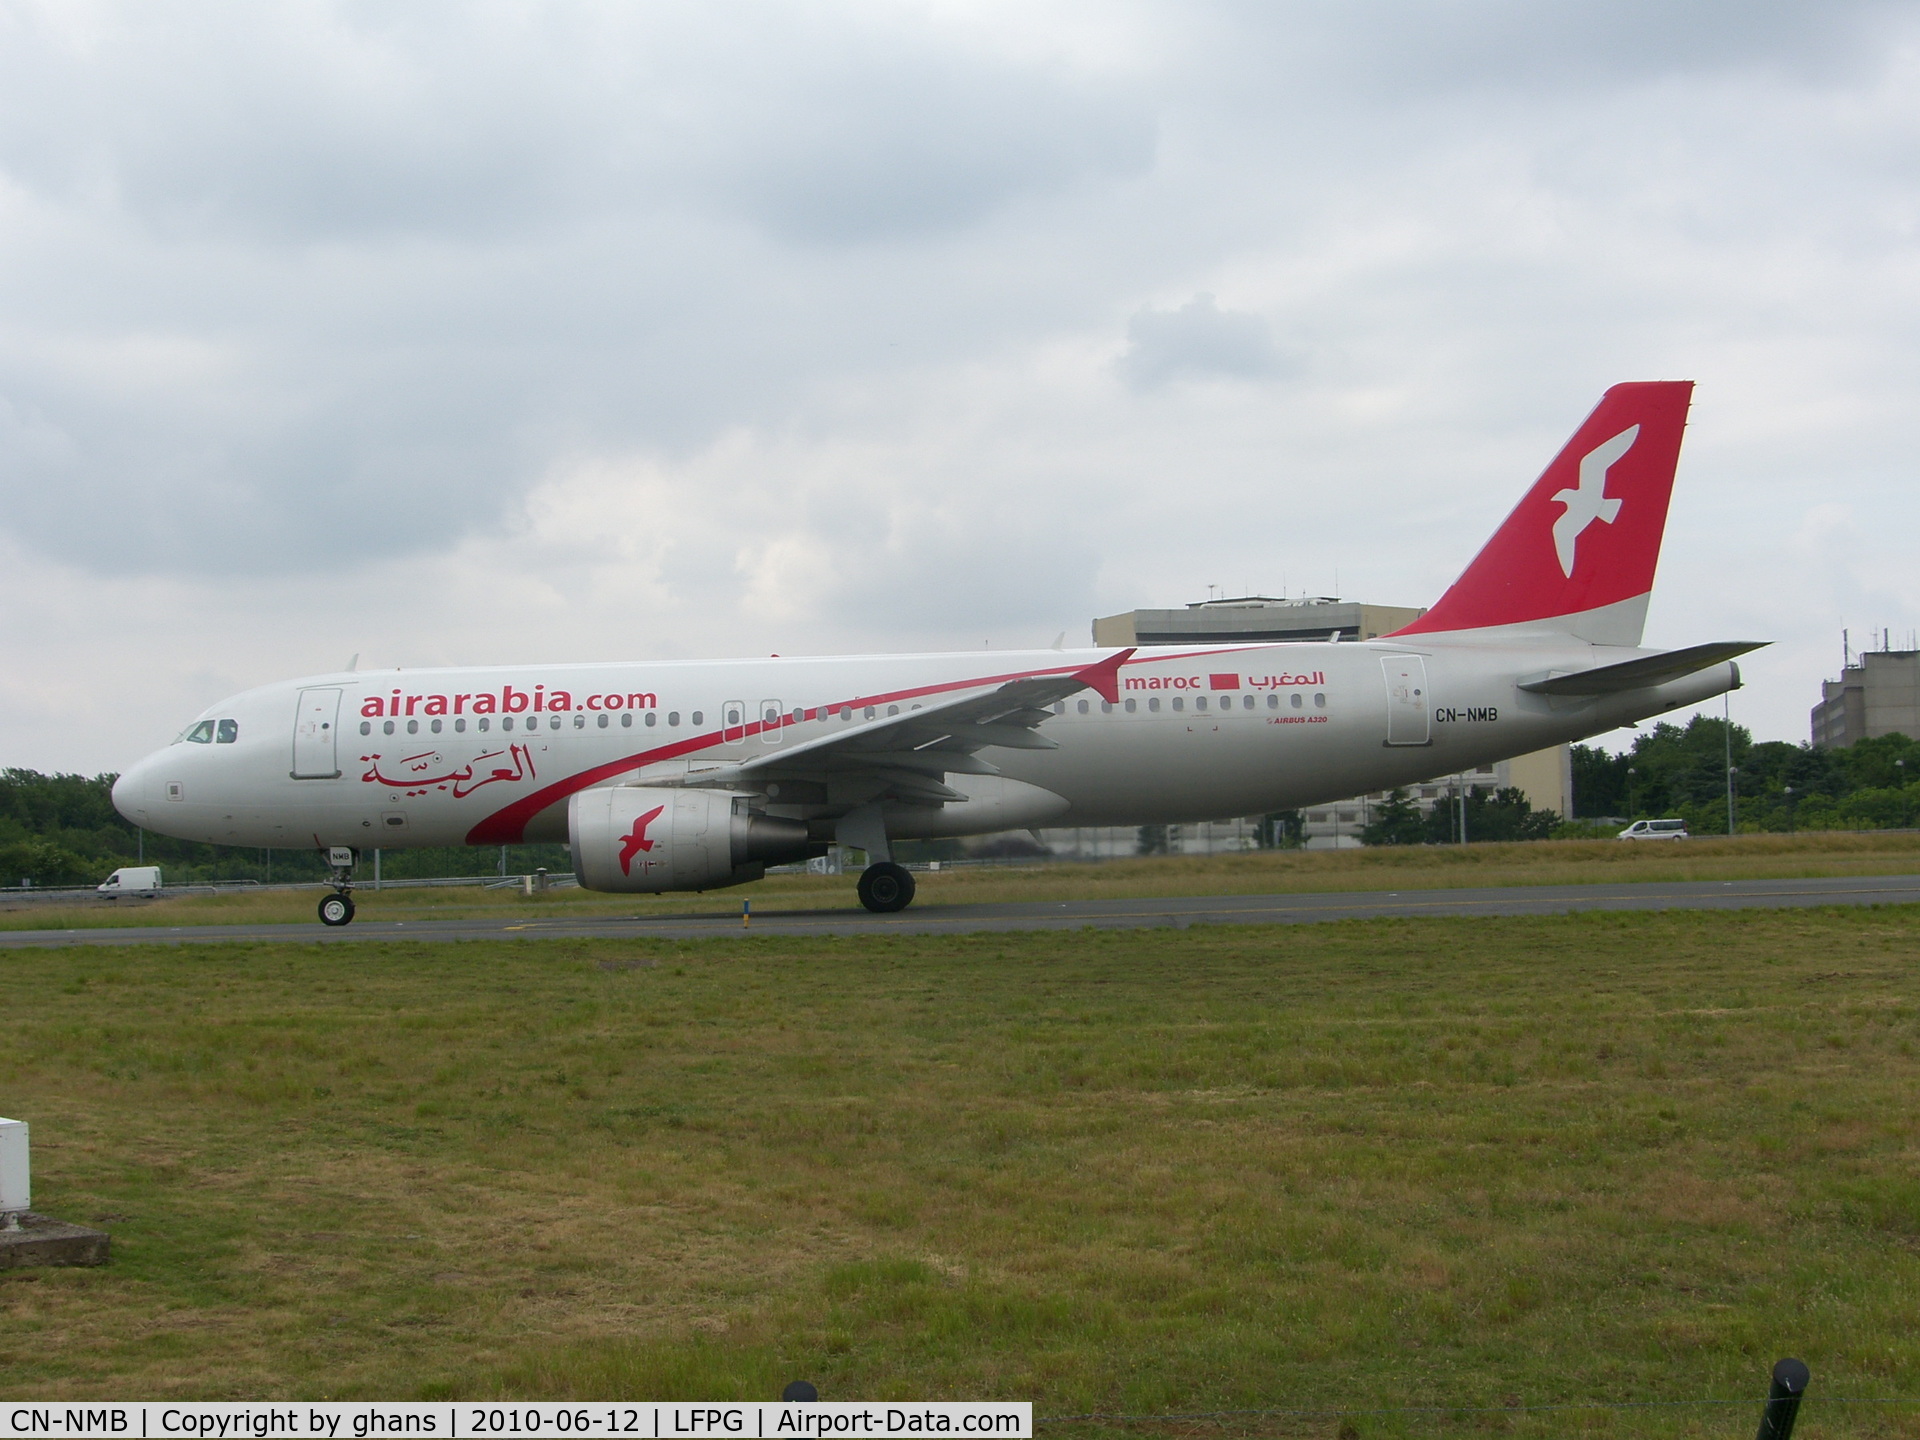 CN-NMB, 2009 Airbus A320-214 C/N 3833, Air Arabia Maroc taxiing past the spottingplace